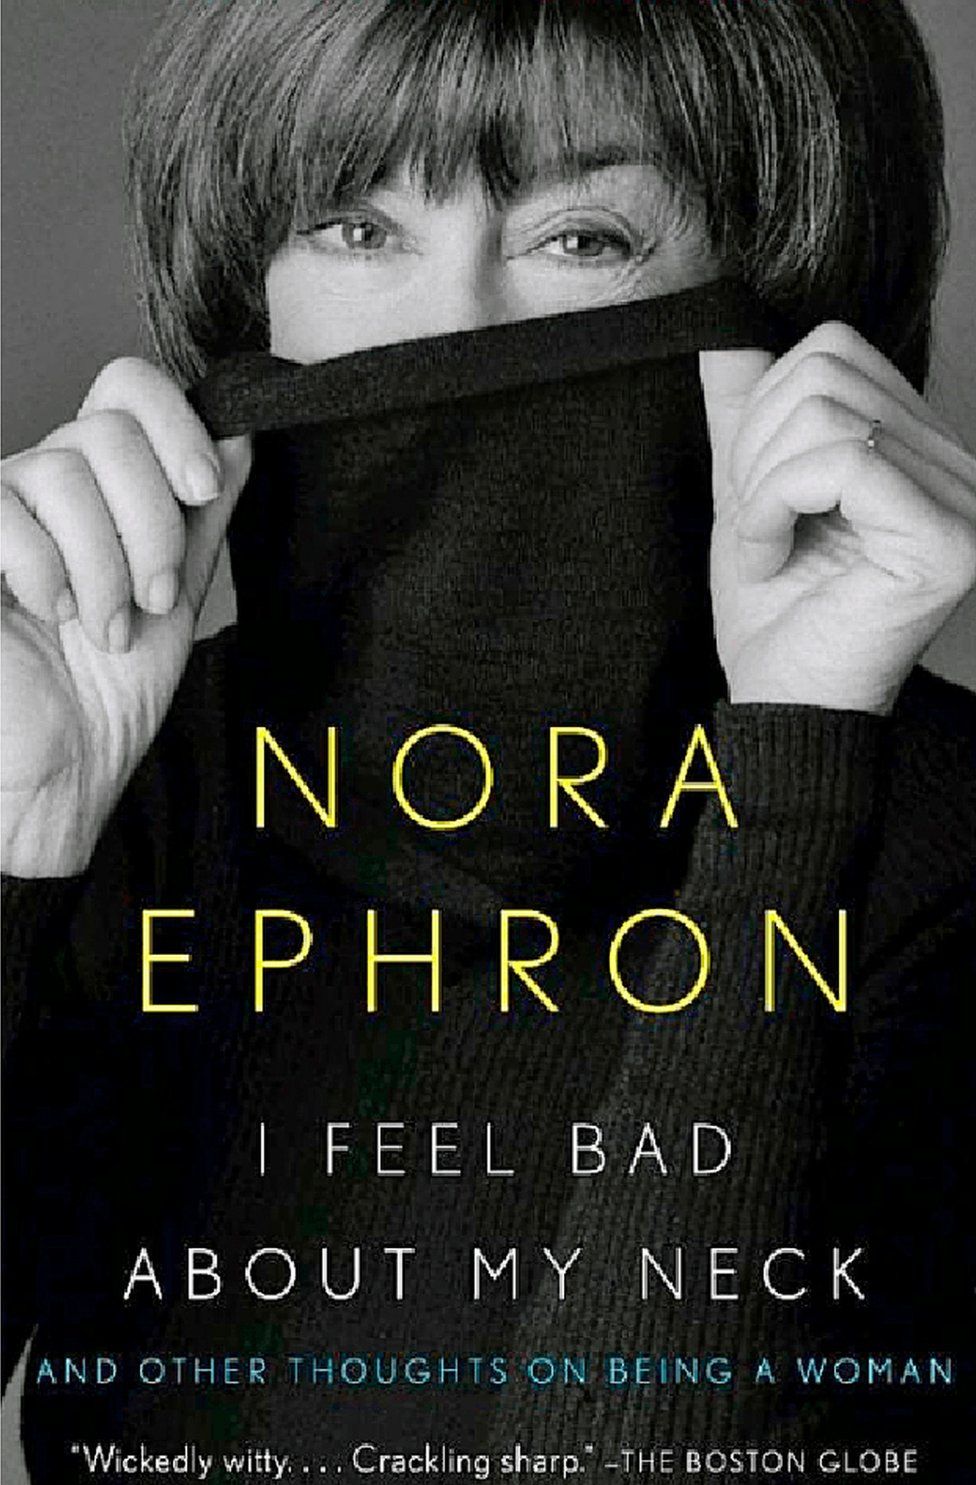 In her essay Nora Ephron says "Our faces are lies and our necks are the truth. You have to cut open a redwood tree to see how old it is, but you wouldn't if it had a neck"